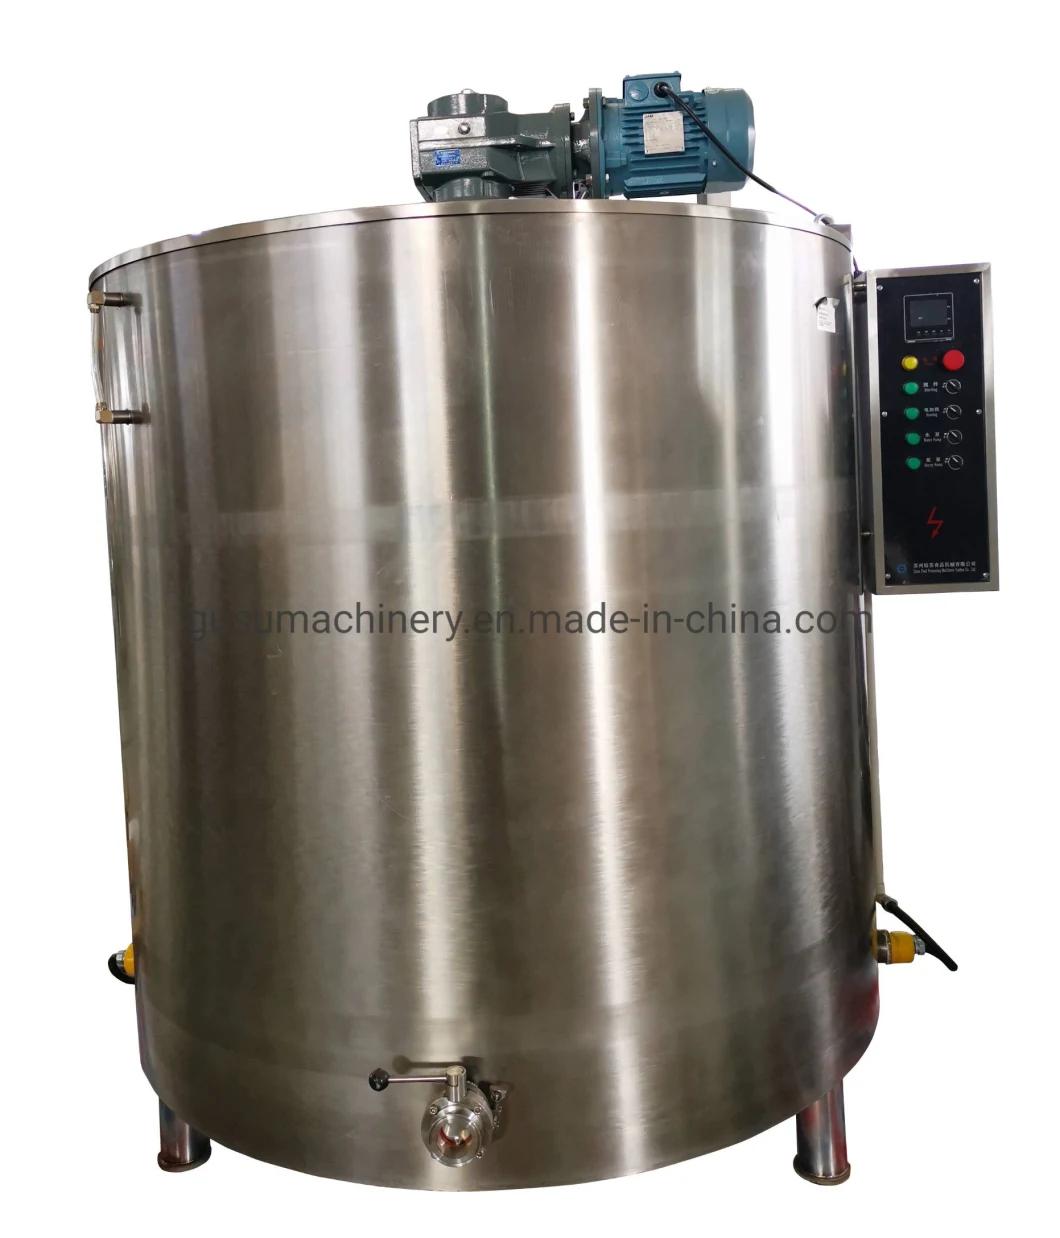 Finished Cocoa Substitute Insulated Tank Volume 2000L